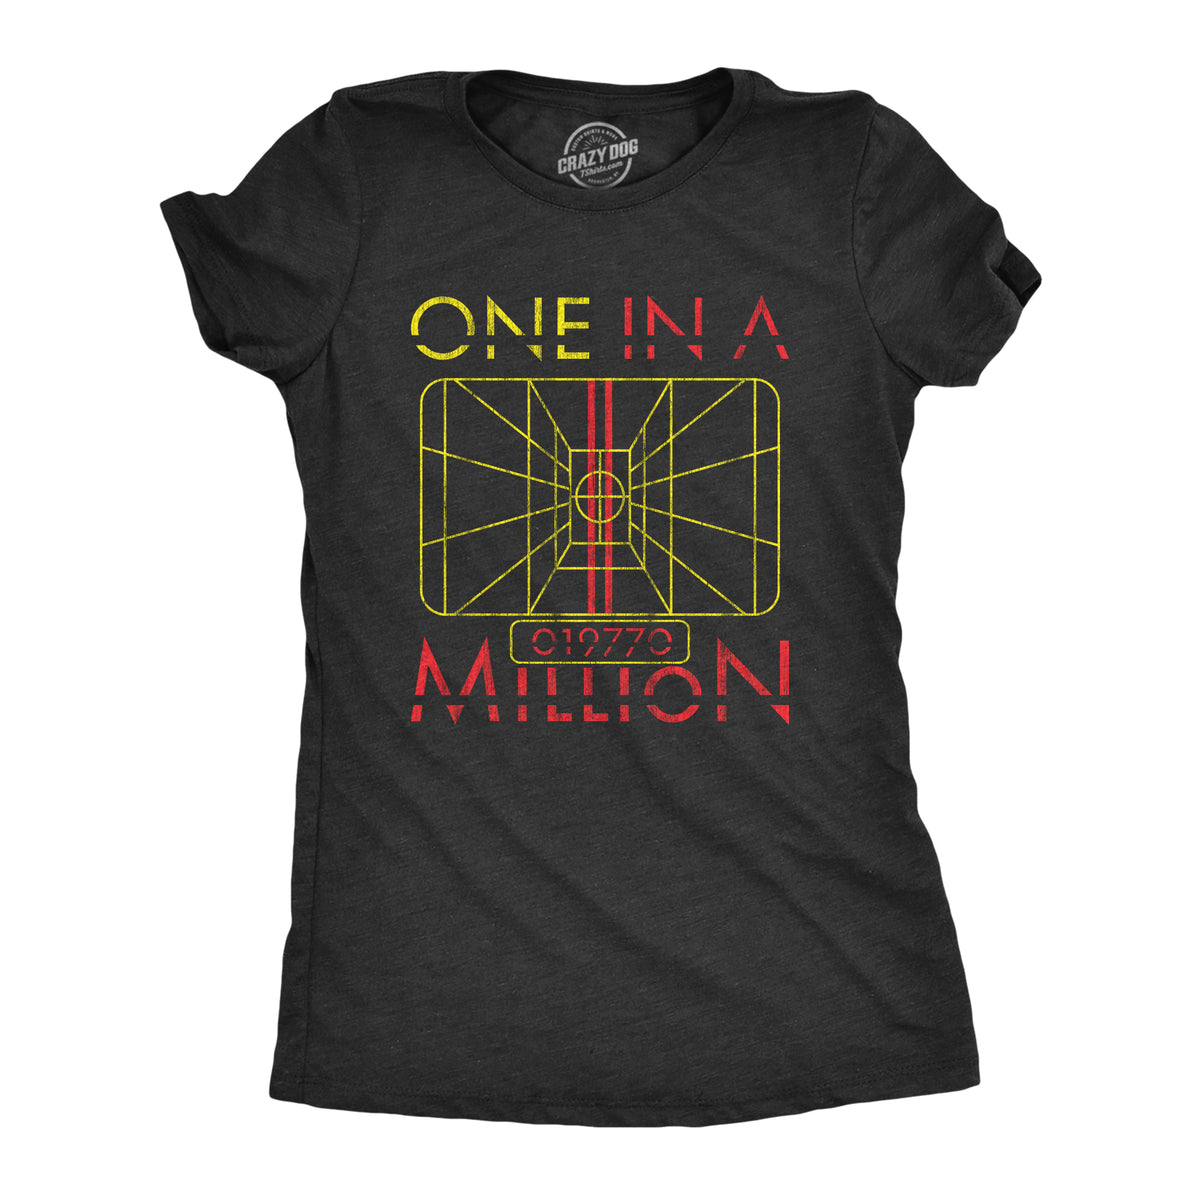 Funny Heather Black One In A Million Womens T Shirt Nerdy TV &amp; Movies Nerdy Tee